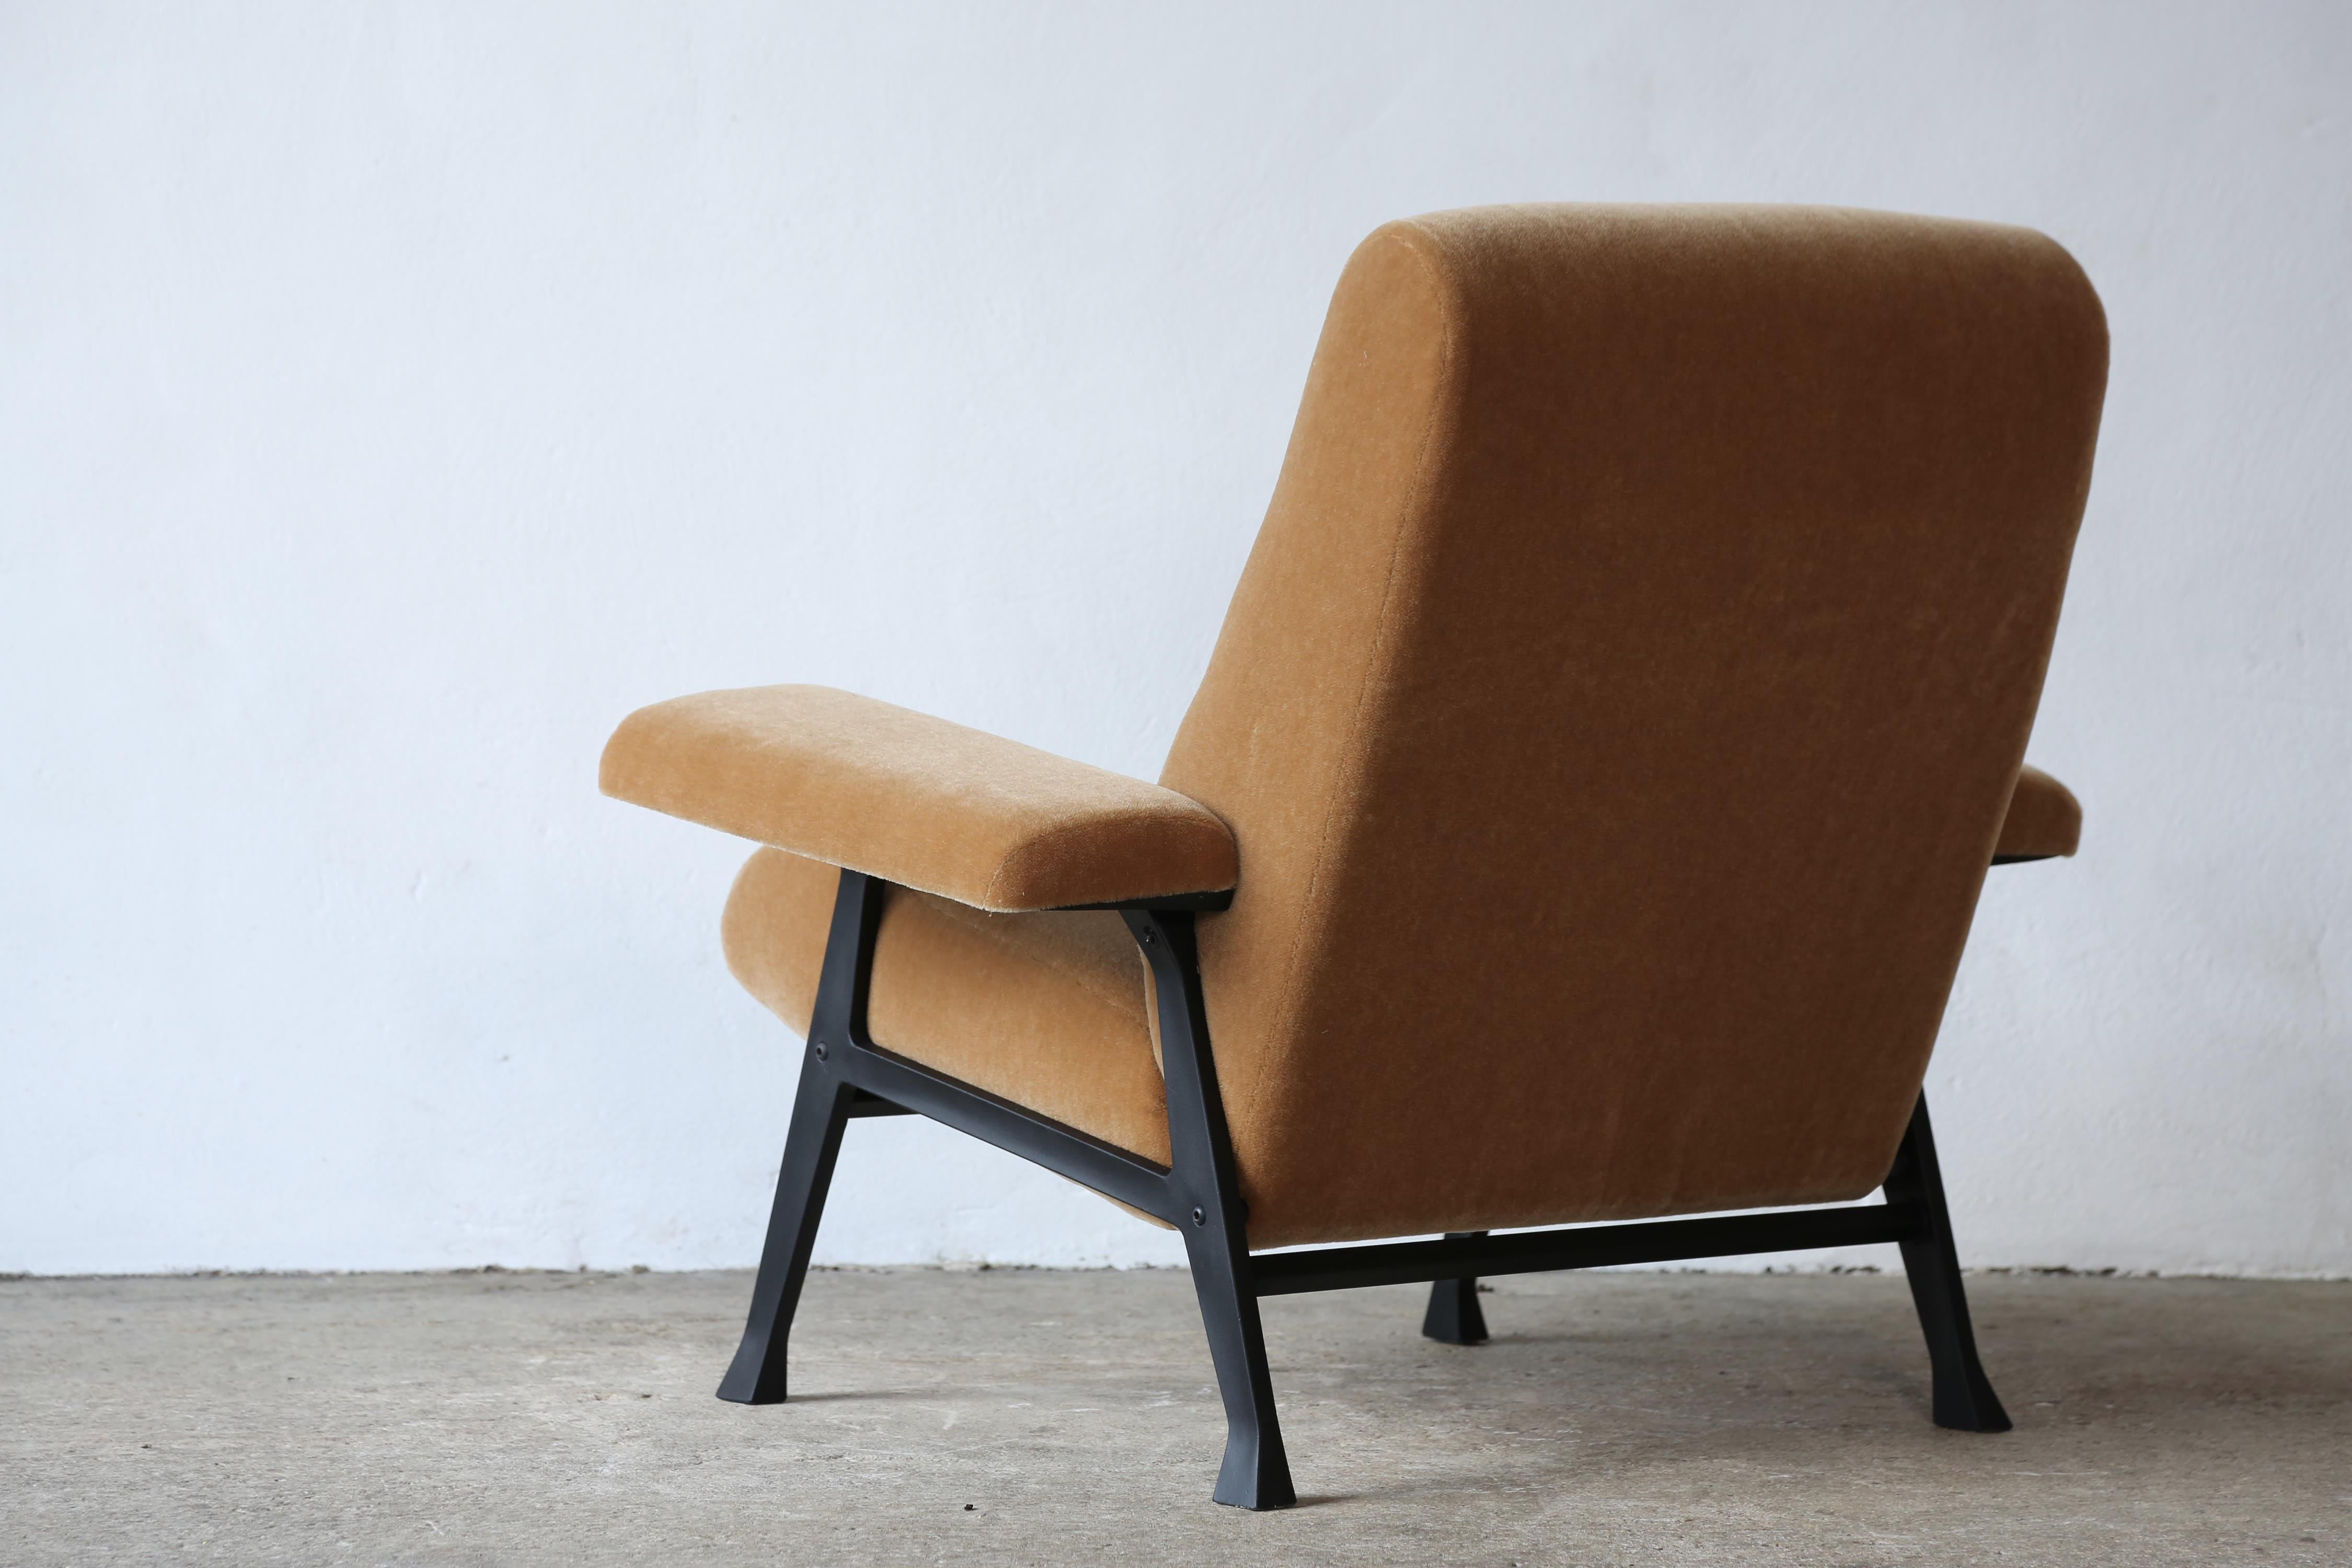 Steel Rare Roberto Menghi Hall Chair, Arflex, Italy, 1950s, Upholstered in Pure Mohair